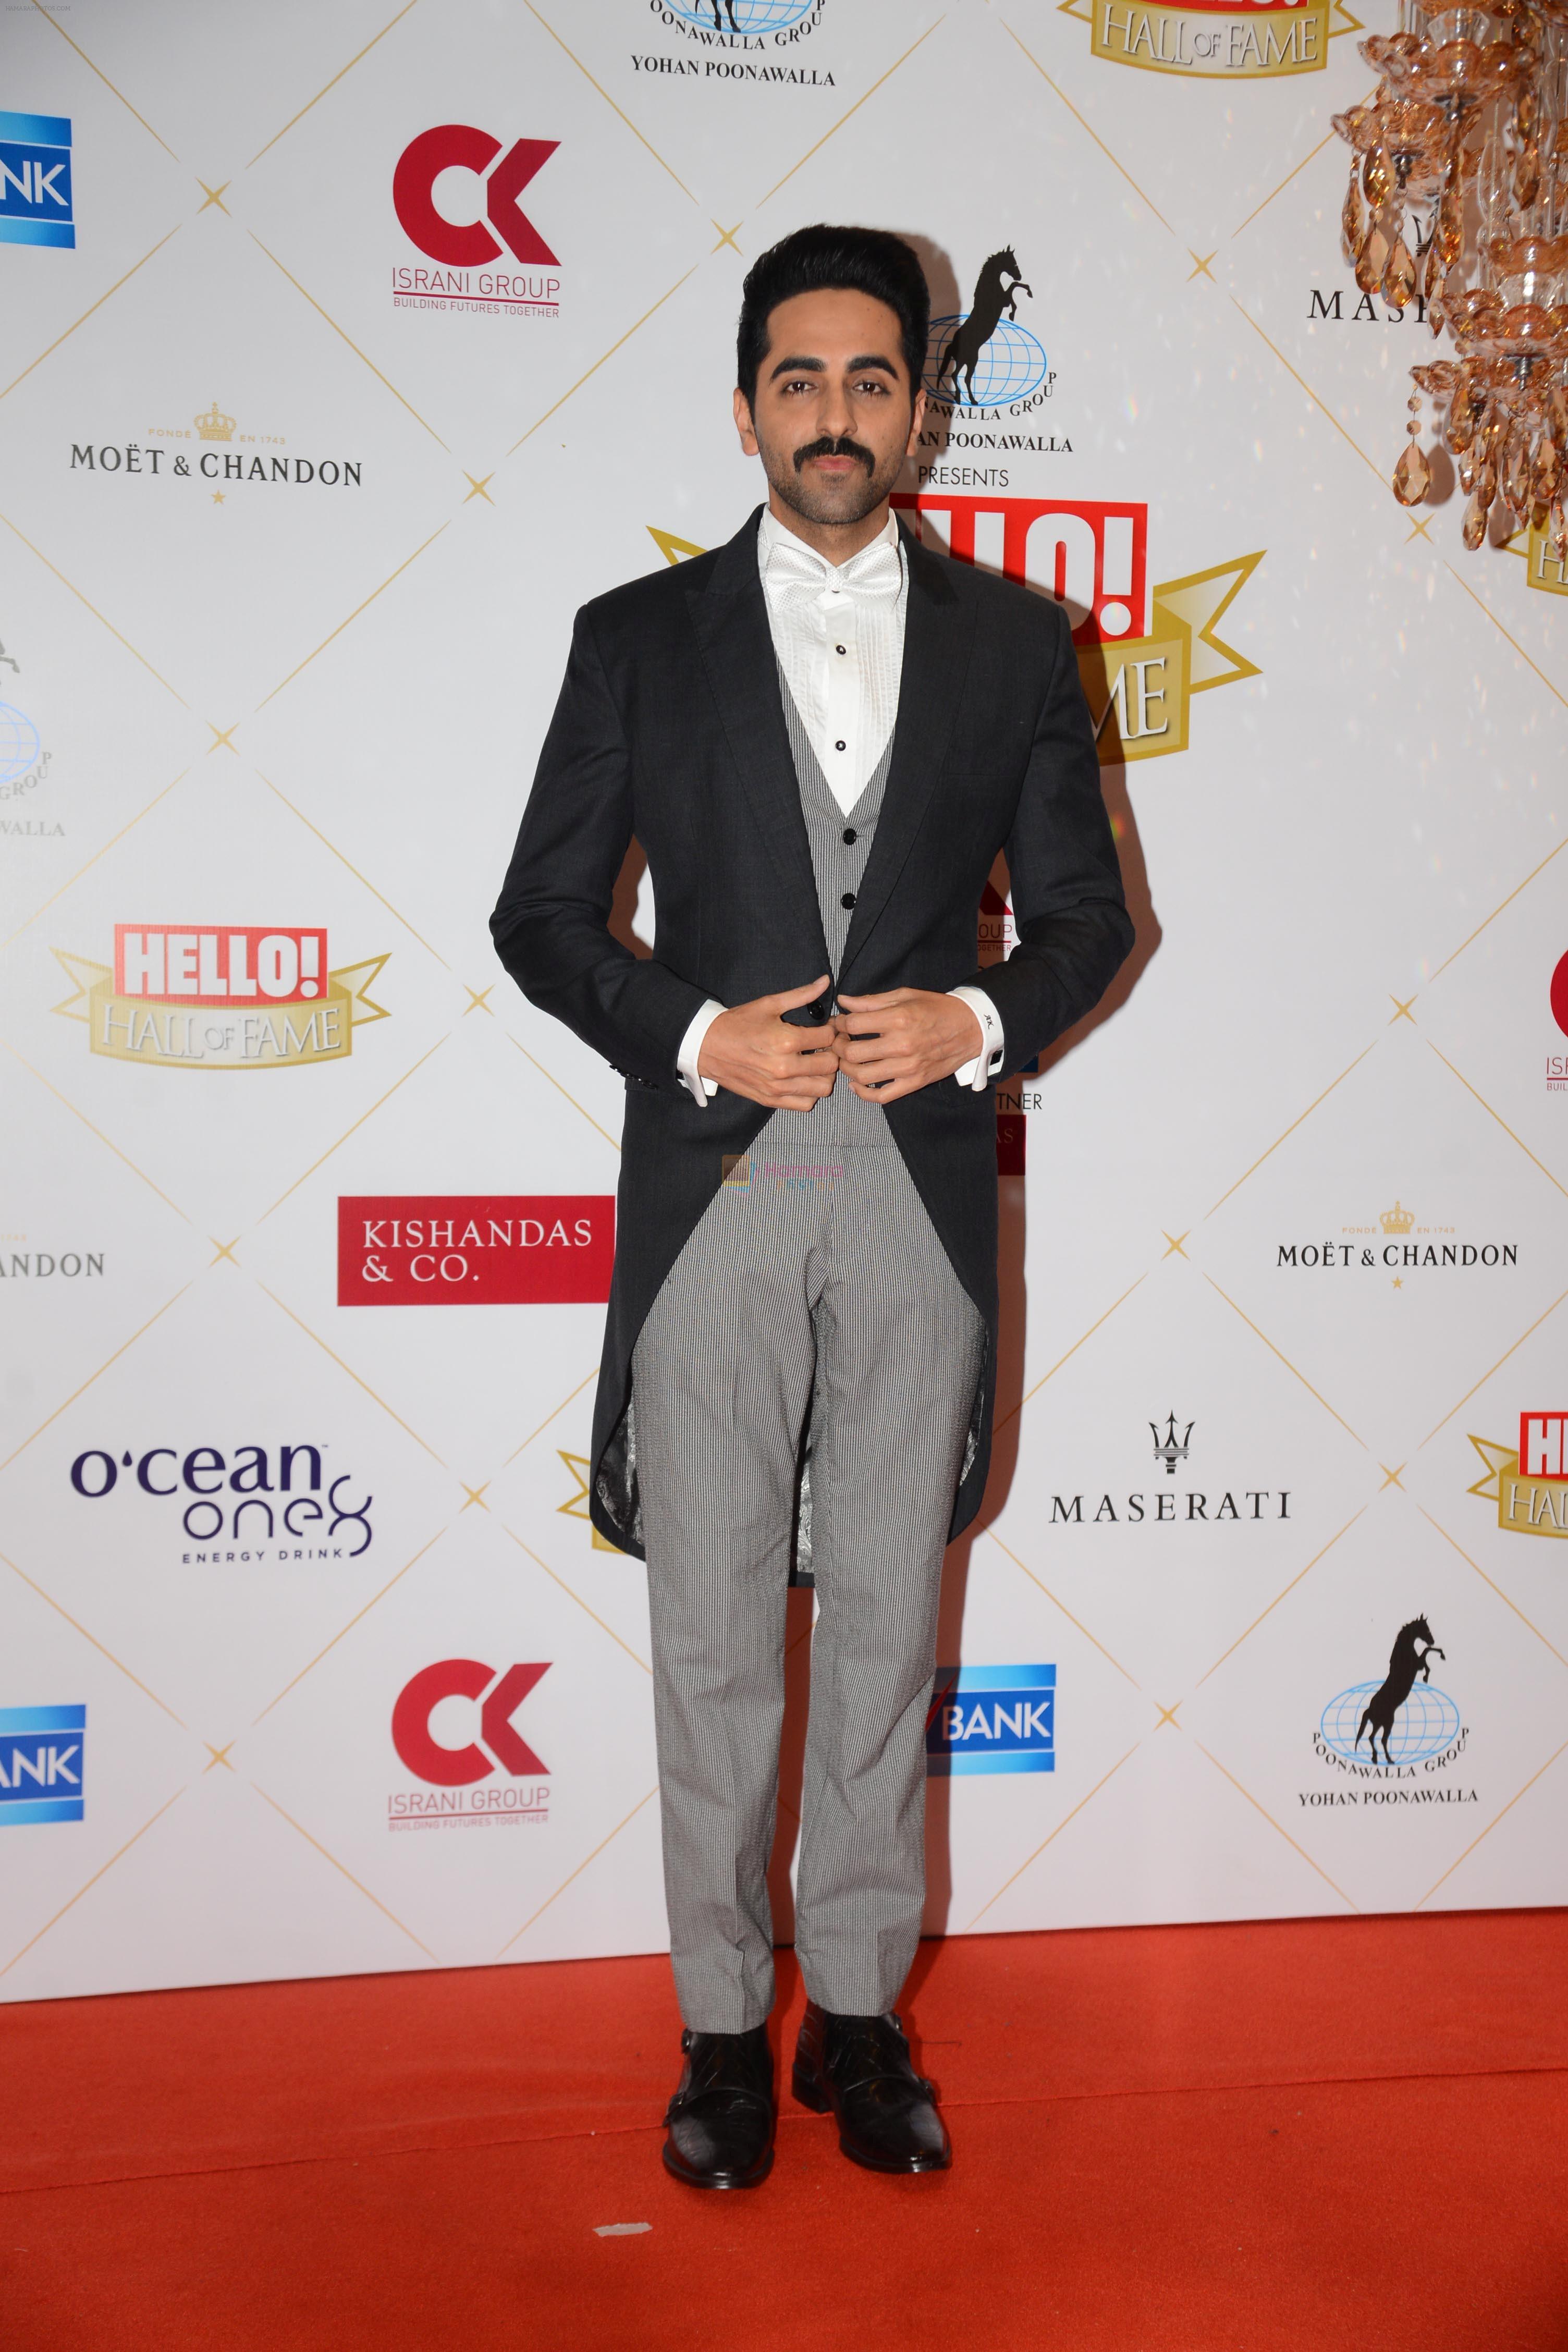 Ayushmann Khurana at the Hello Hall of Fame Awards in St Regis hotel on 18th March 2019